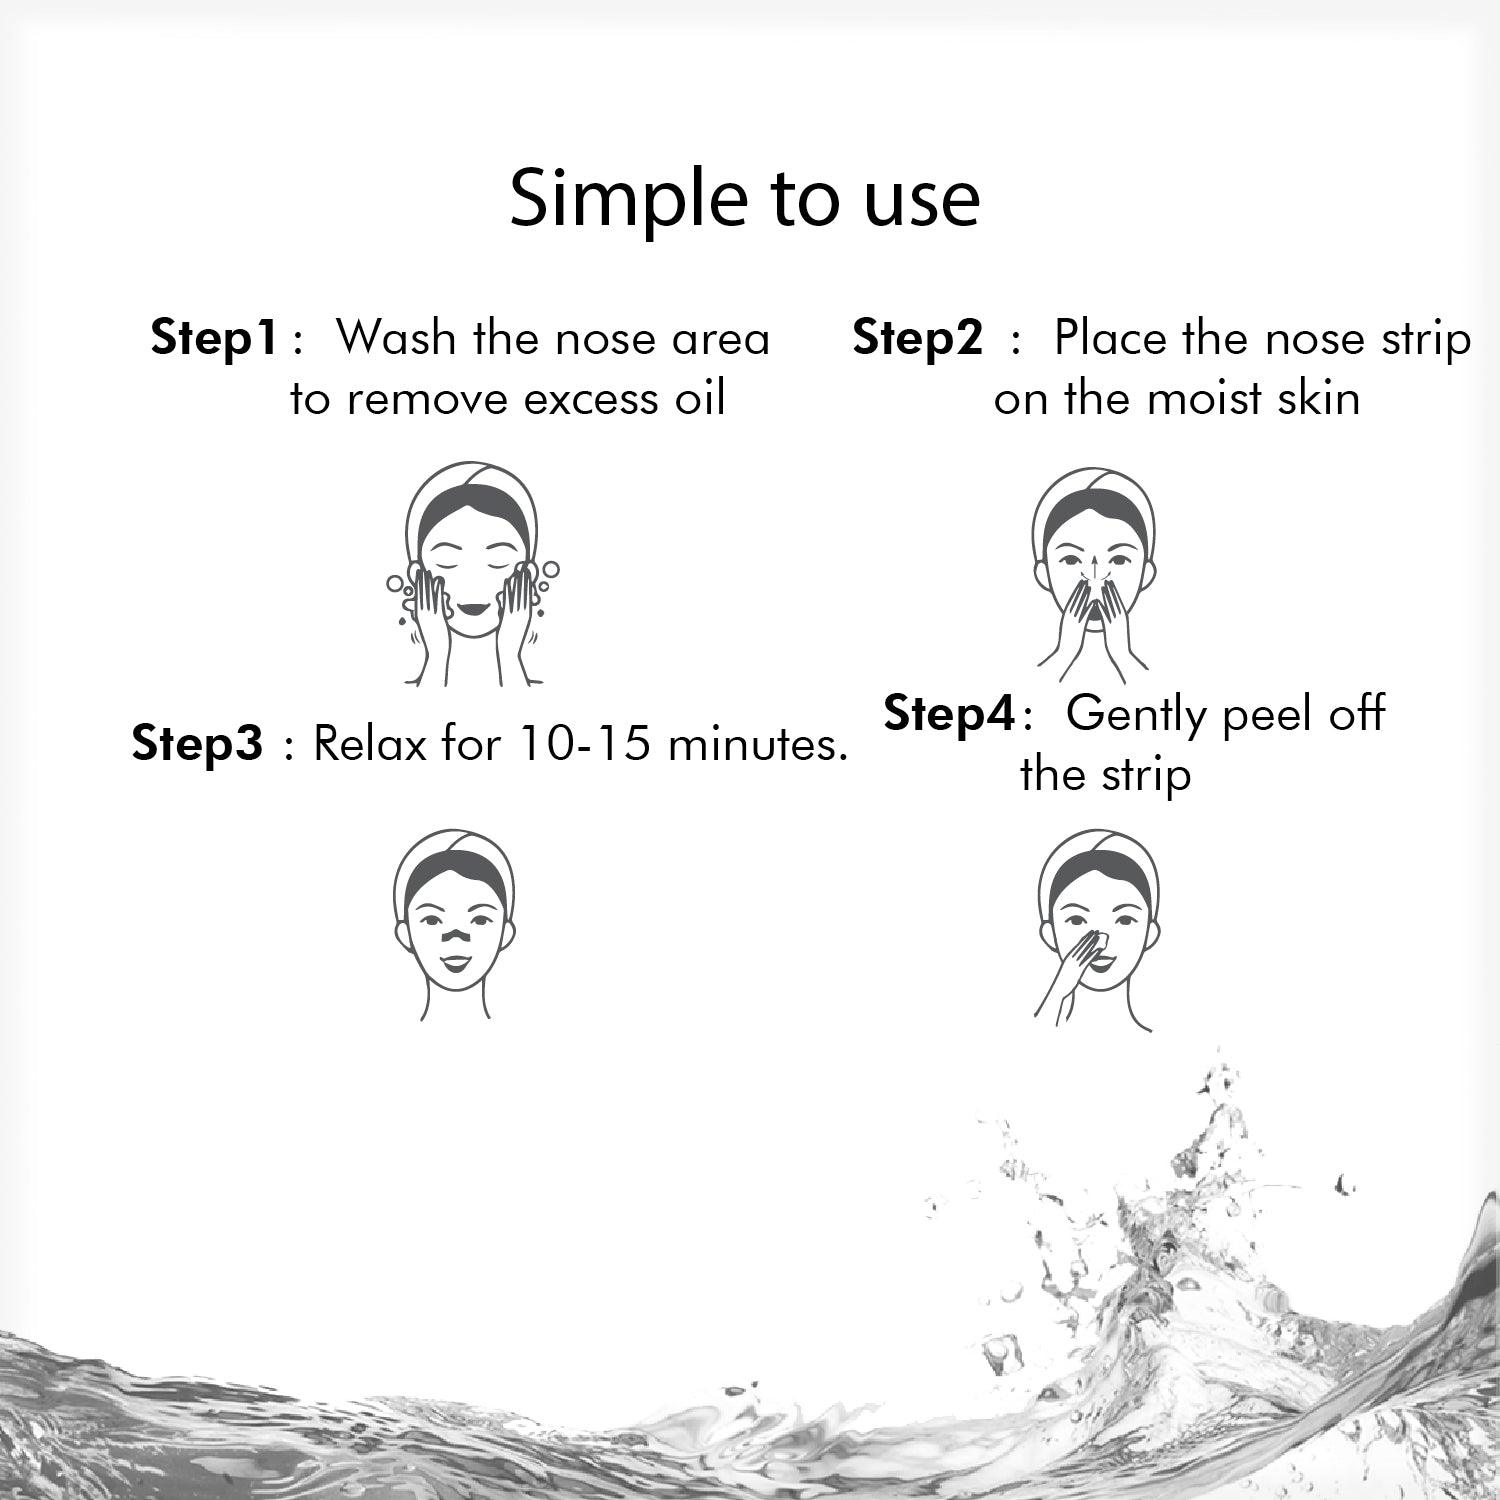 How to Apply Nose Strips in Simple Steps